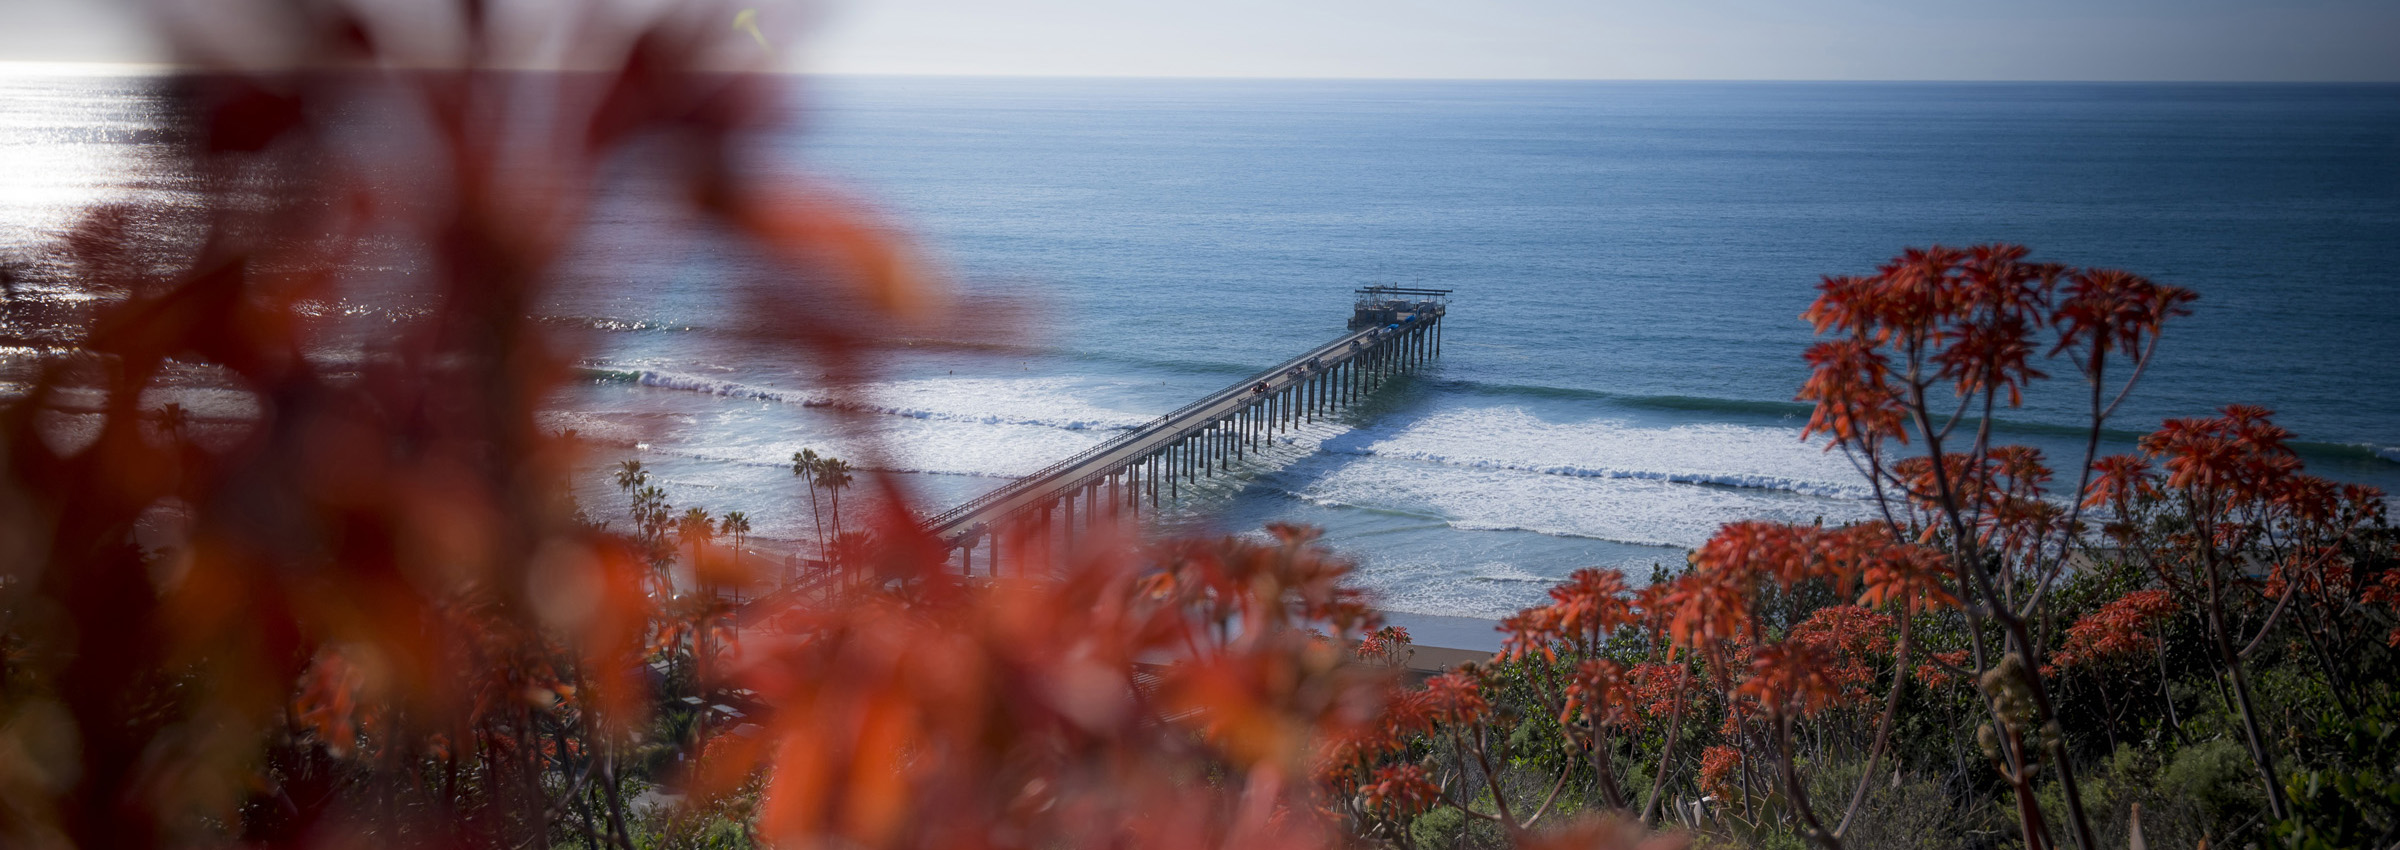 scripps pier with red flowers